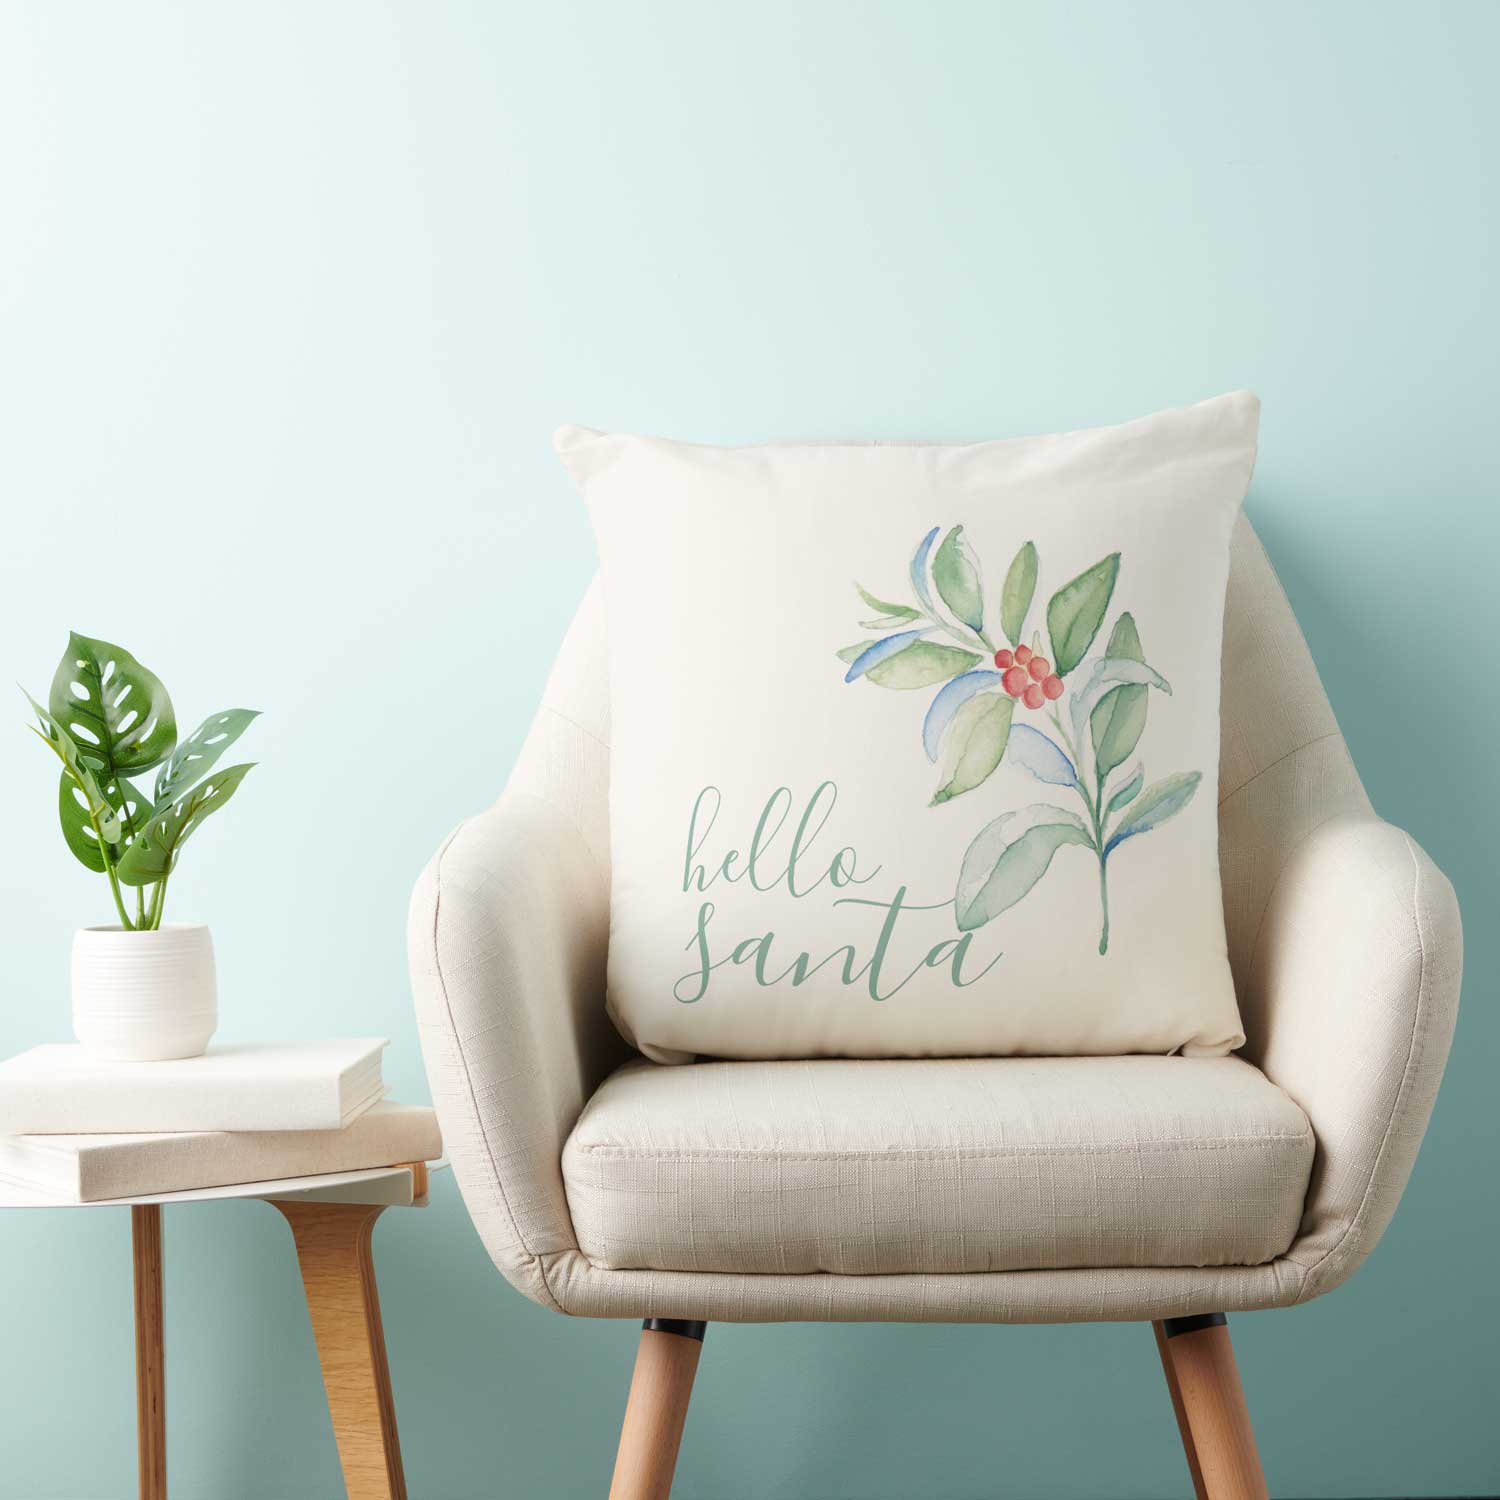 Christmas pillows feature the words "hello santa" with a sprig of watercolor greenery and red berries. Click to shop this pillow.